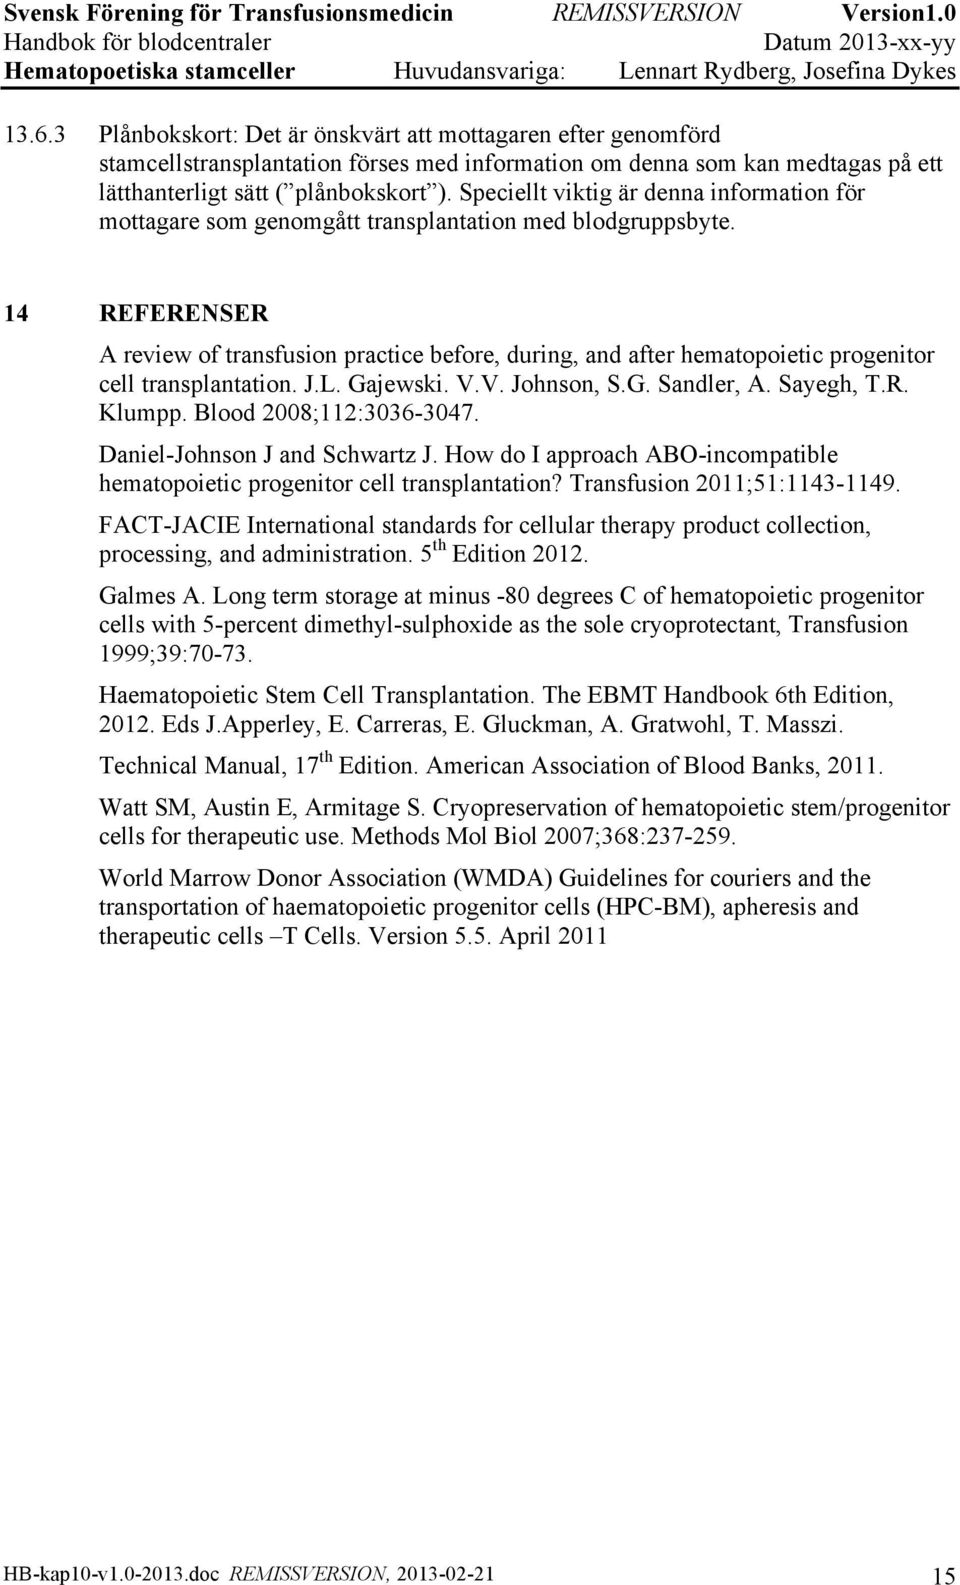 14 REFERENSER A review of transfusion practice before, during, and after hematopoietic progenitor cell transplantation. J.L. Gajewski. V.V. Johnson, S.G. Sandler, A. Sayegh, T.R. Klumpp.